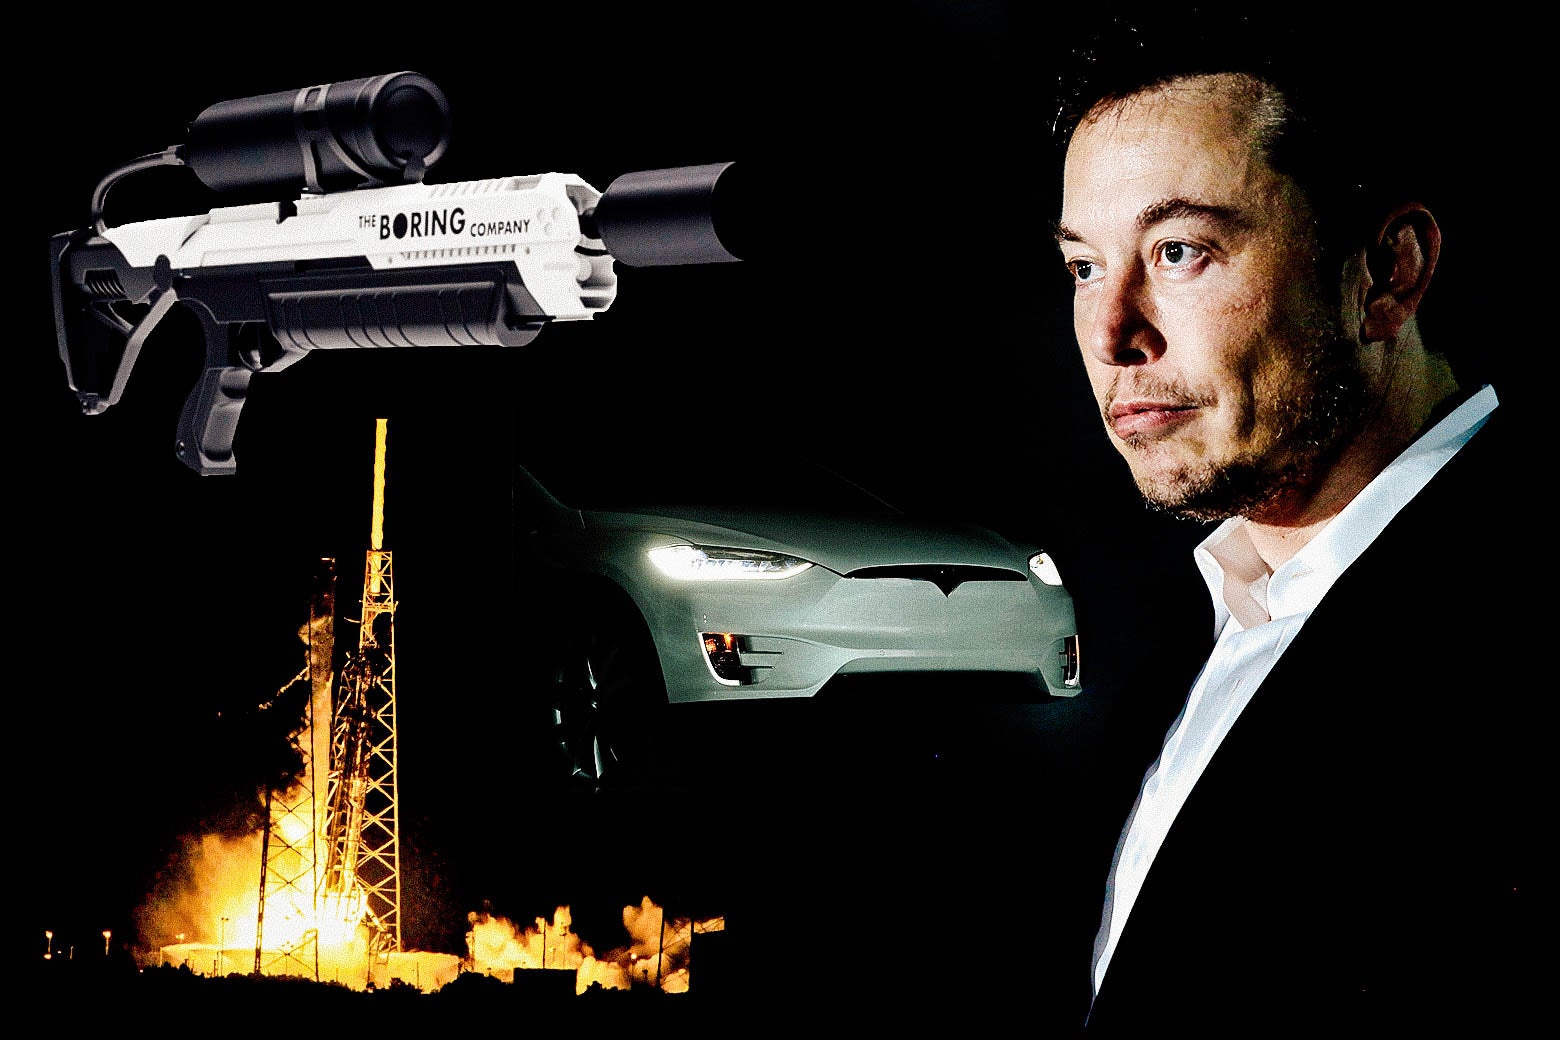 A collage of a Boring Company flamethrower, a Tesla, a SpaceX launch, and Elon Musk.